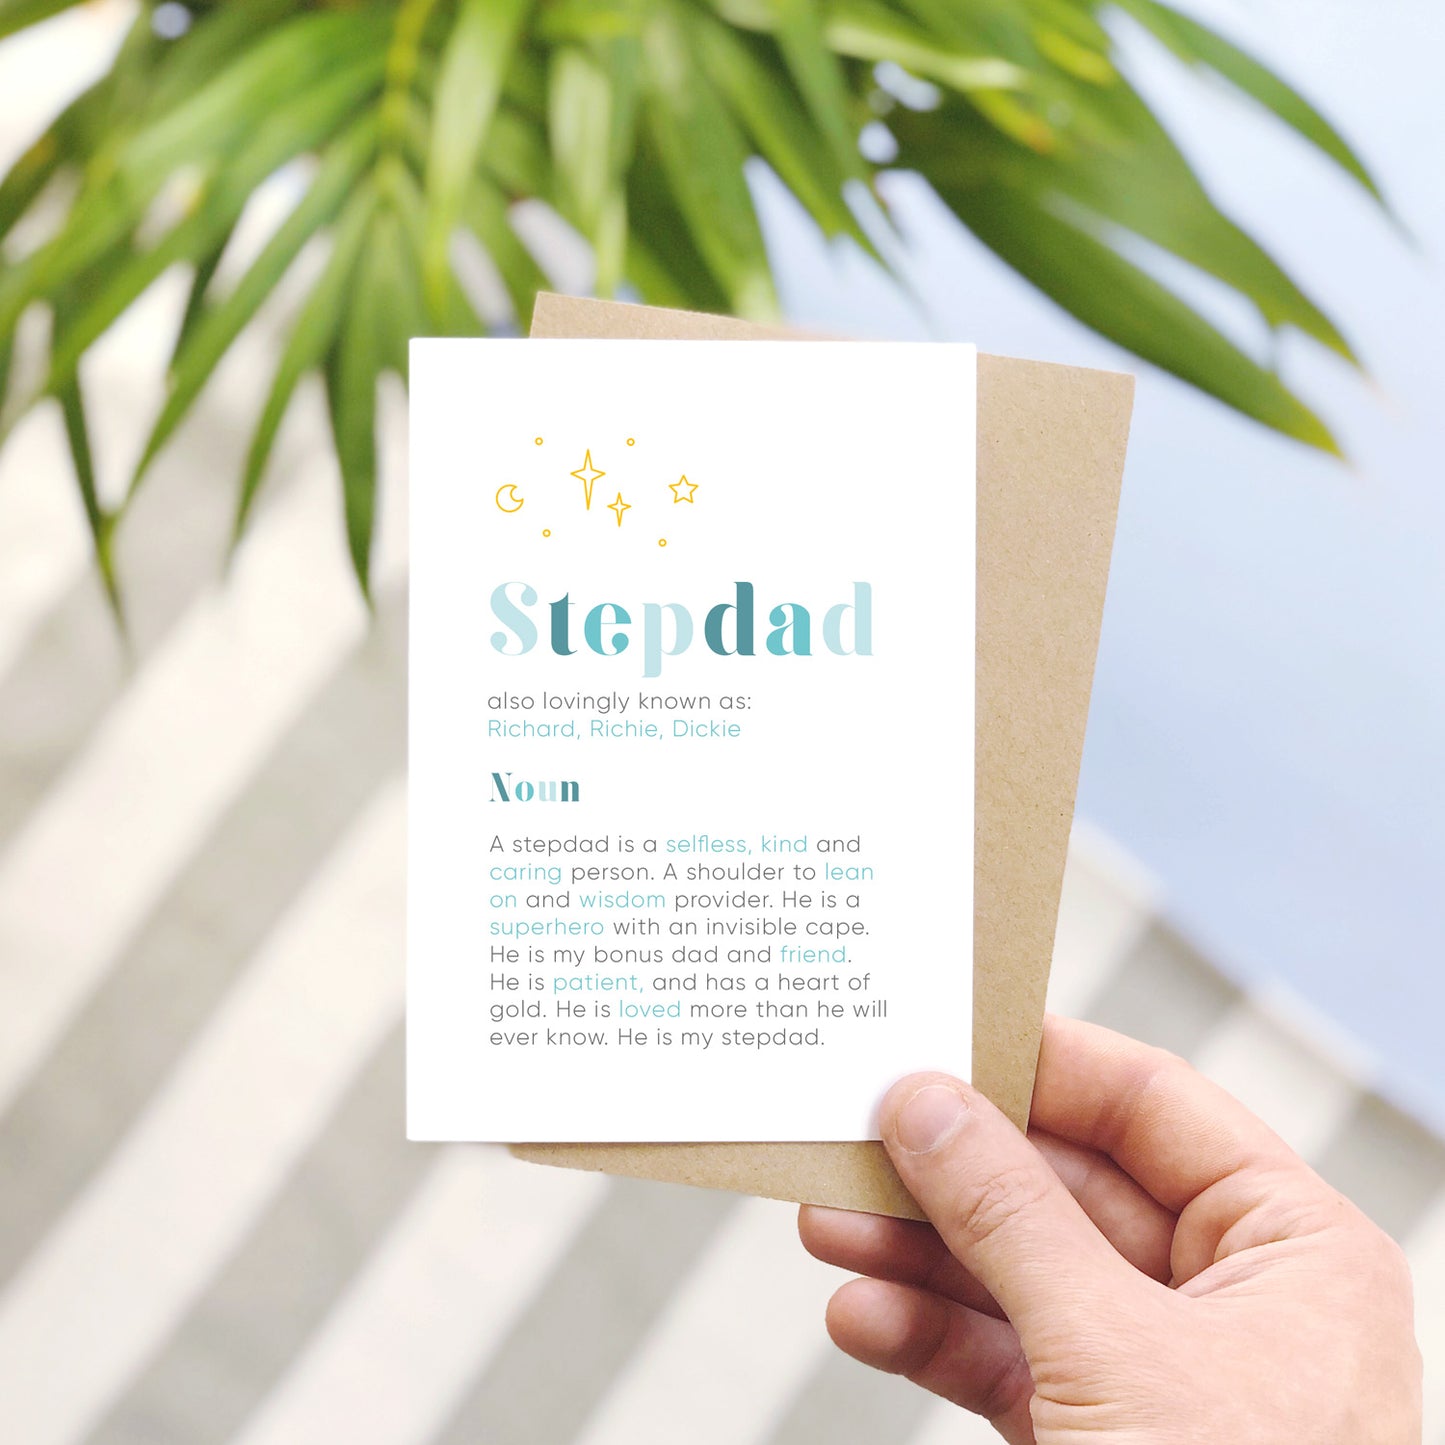 A personalised stepdad definition card being held over a stripy carpet, an area of blue and with a pot plant in the background. Each card has space for nicknames under the blue stepdad text and below features the definition of what it means to be a stepdad.